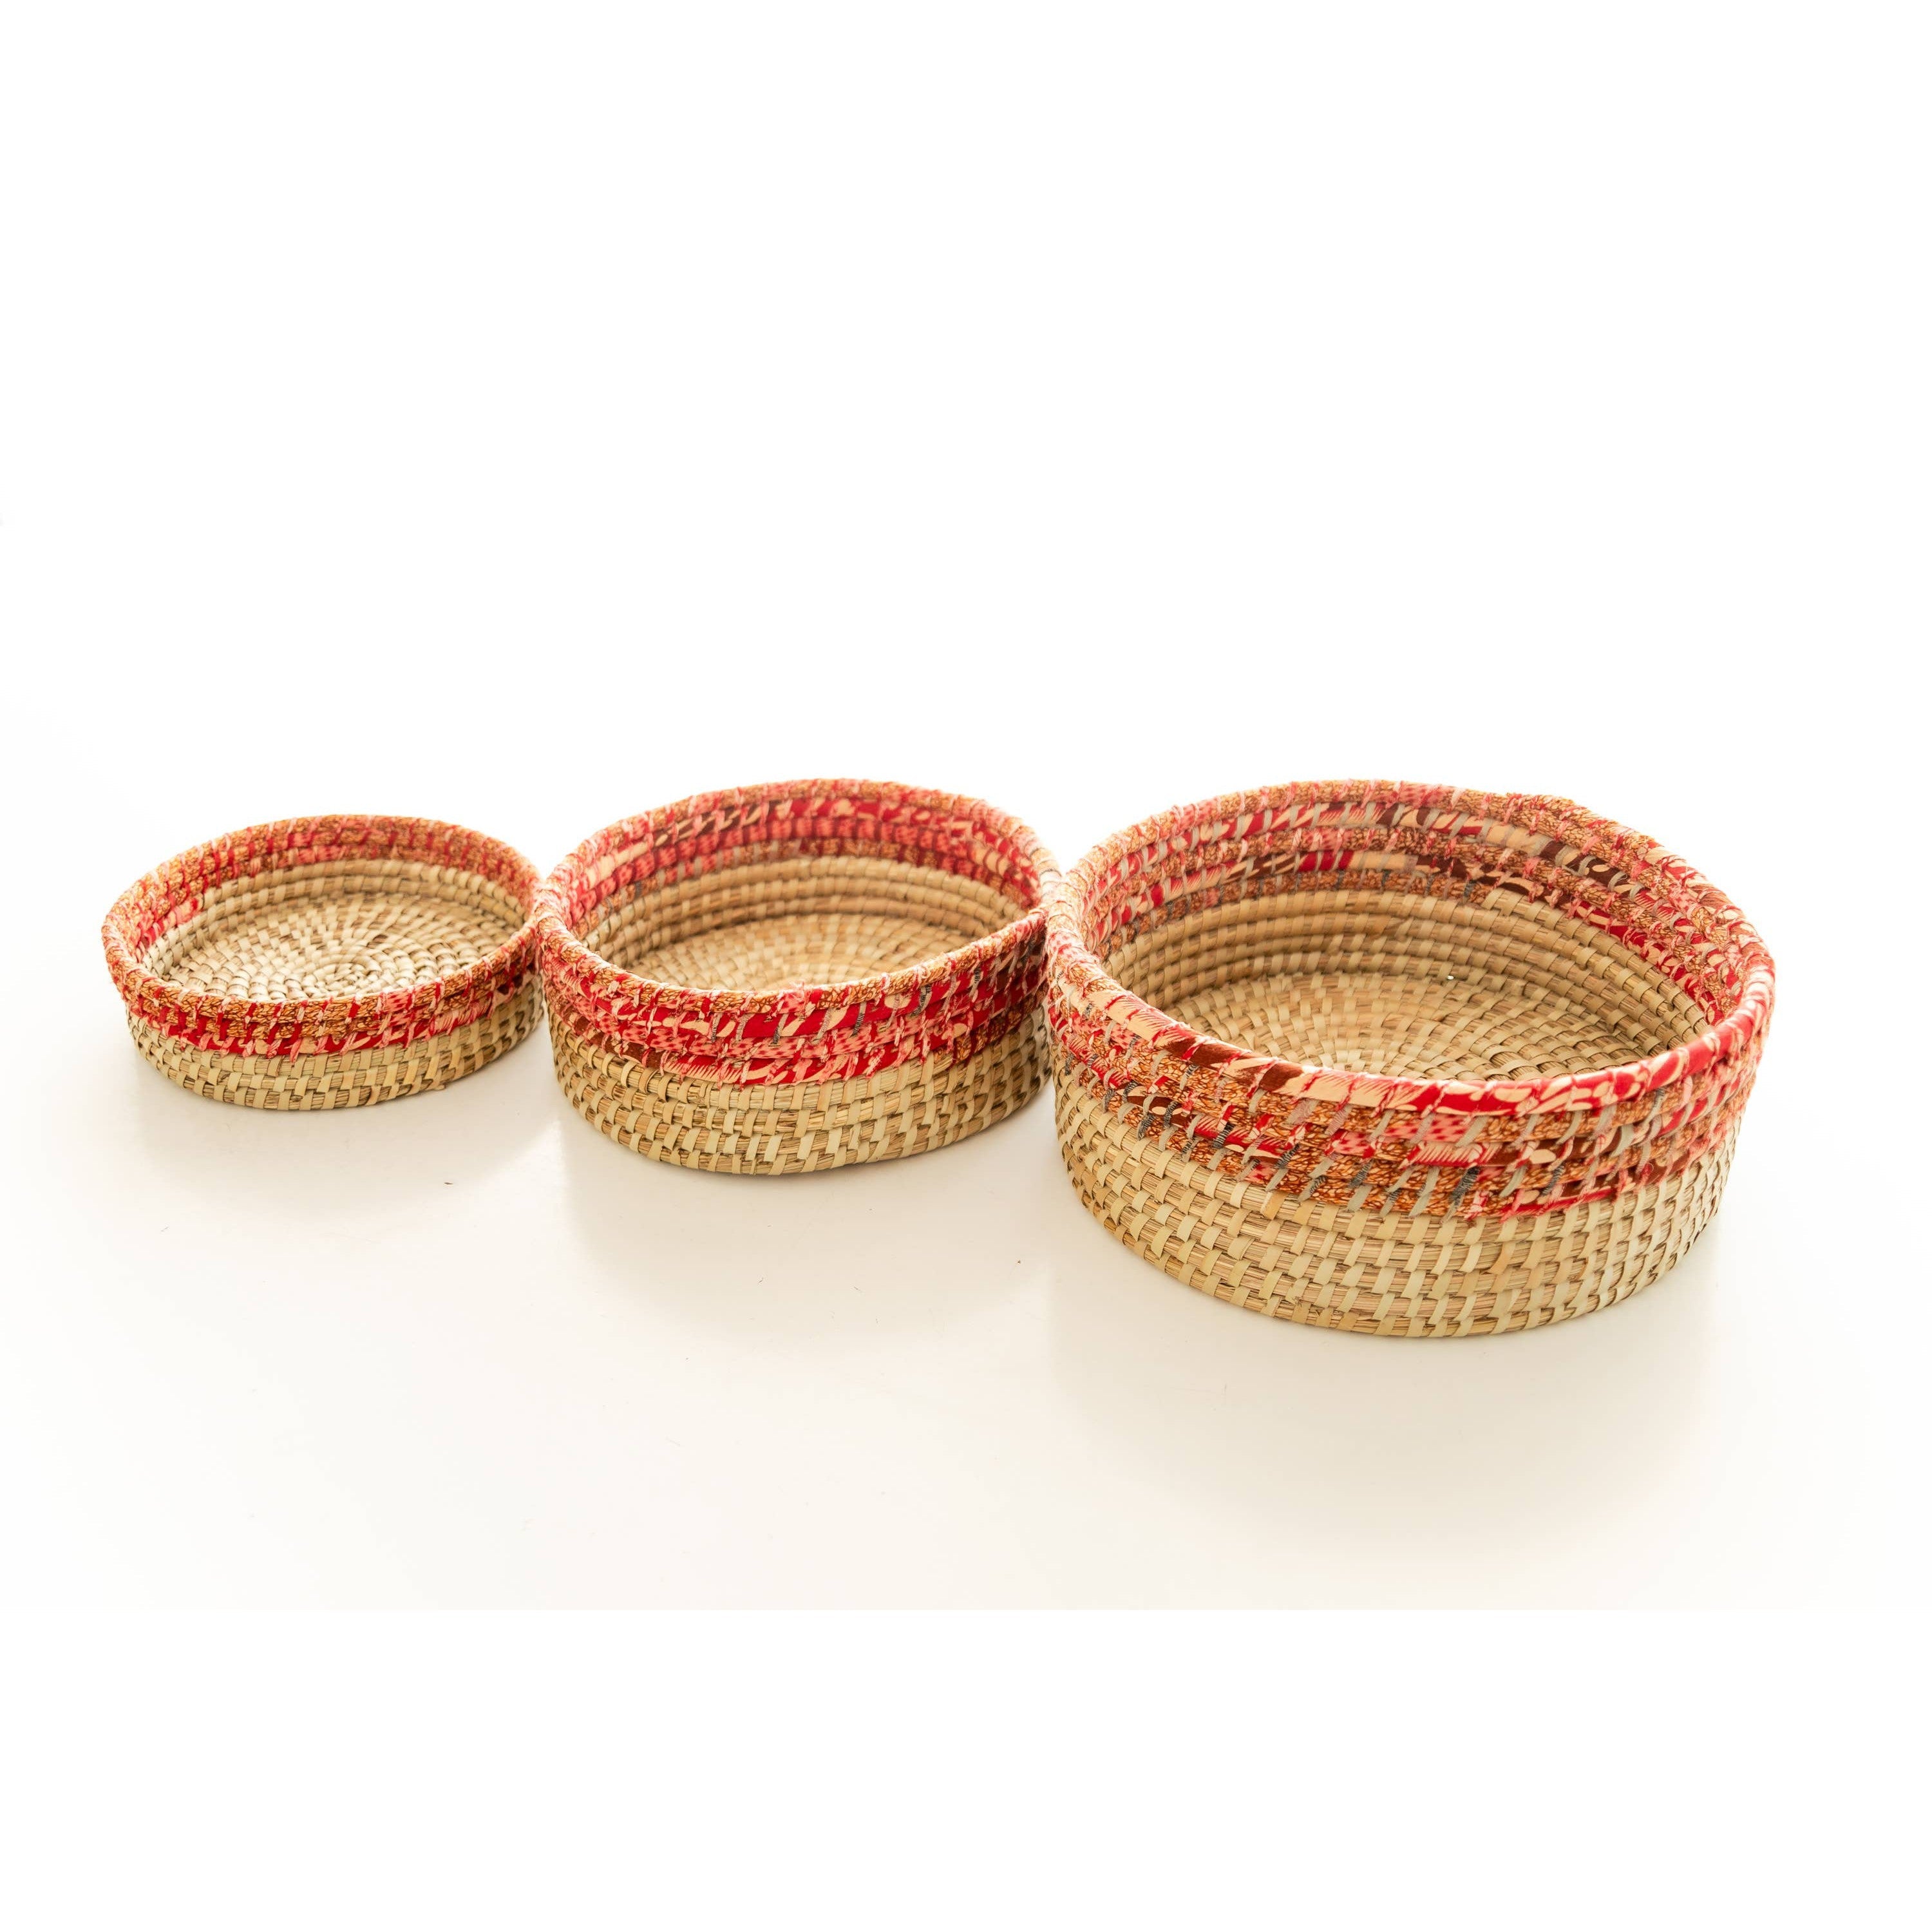 Round Cascades Basket Medium - - Assorted Colors/Patterns (*Local Pickup/Local Delivery Only)